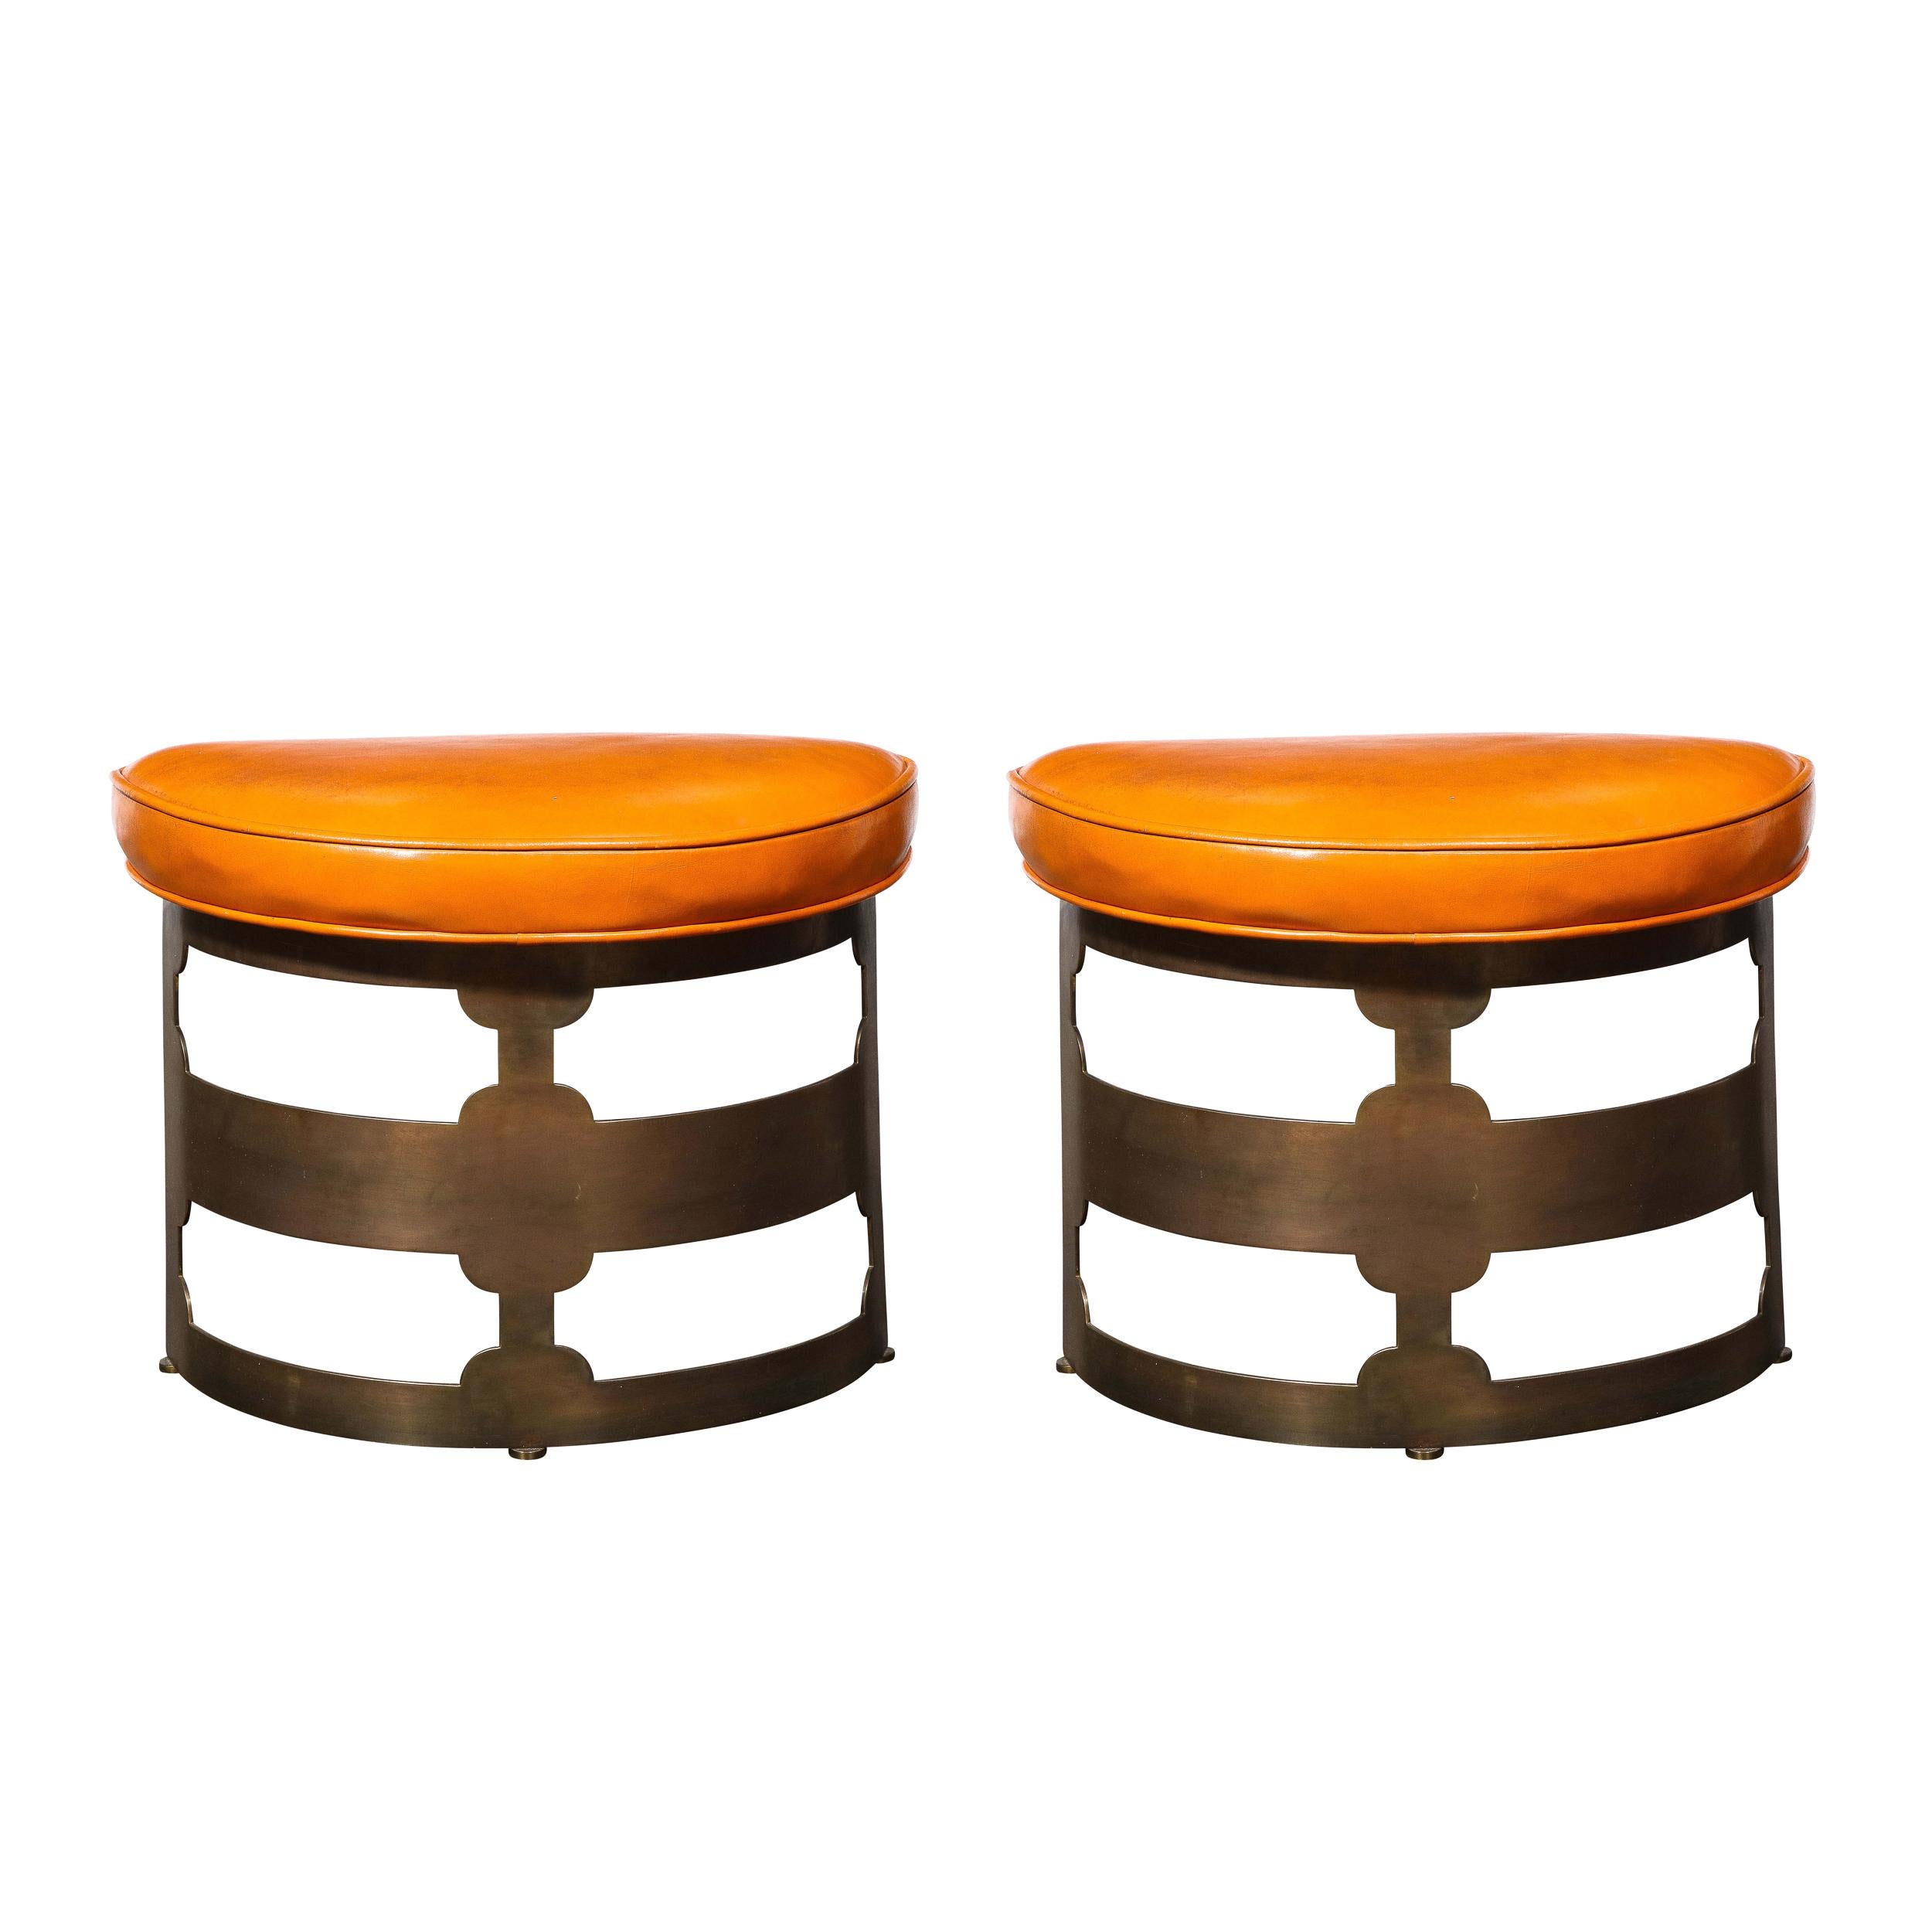 Pair Mid-Century Modernist Oil Rubbed Bronze & Leather Demilune Stools for Wyeth For Sale